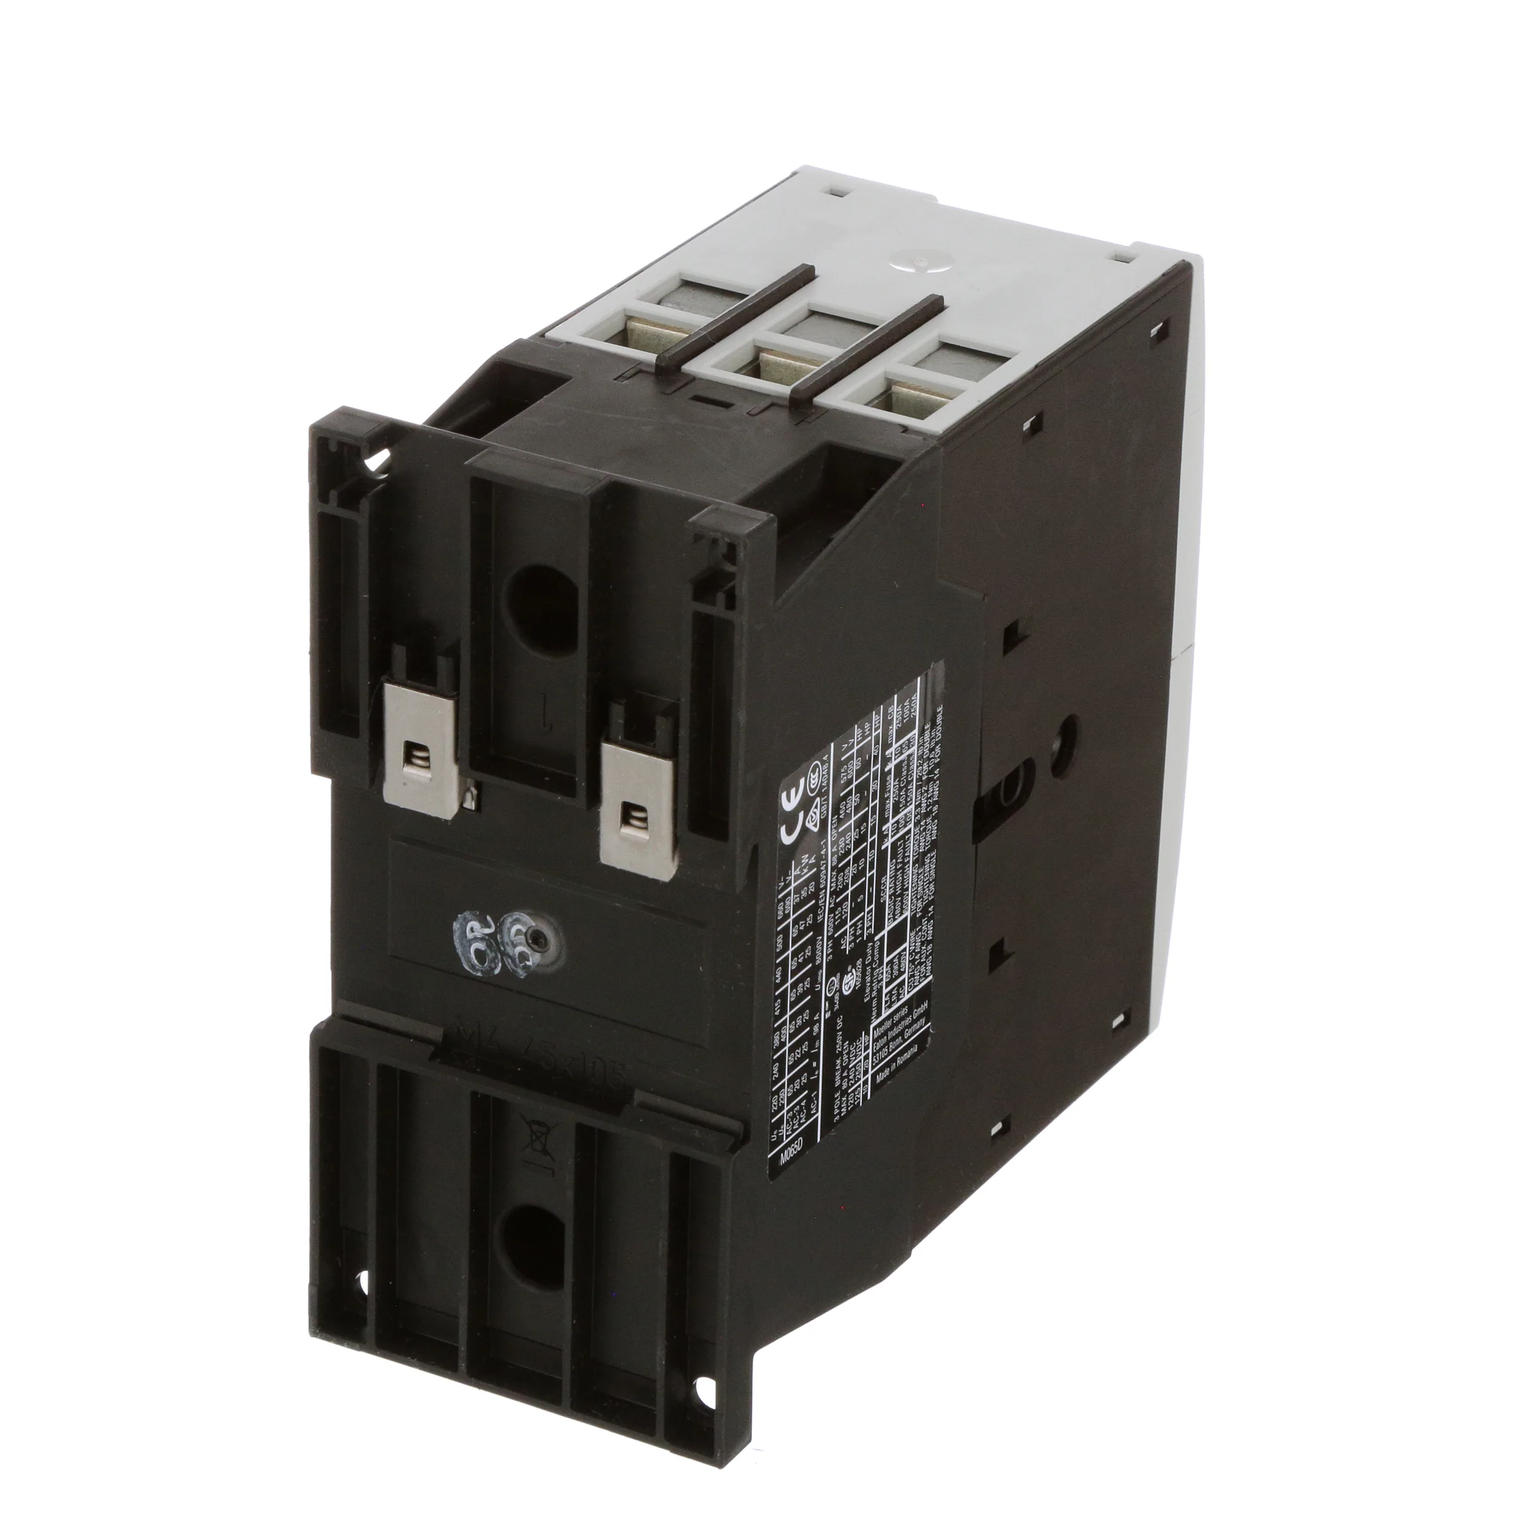 XTCE065D00TD - Eaton - Magnetic Contactor